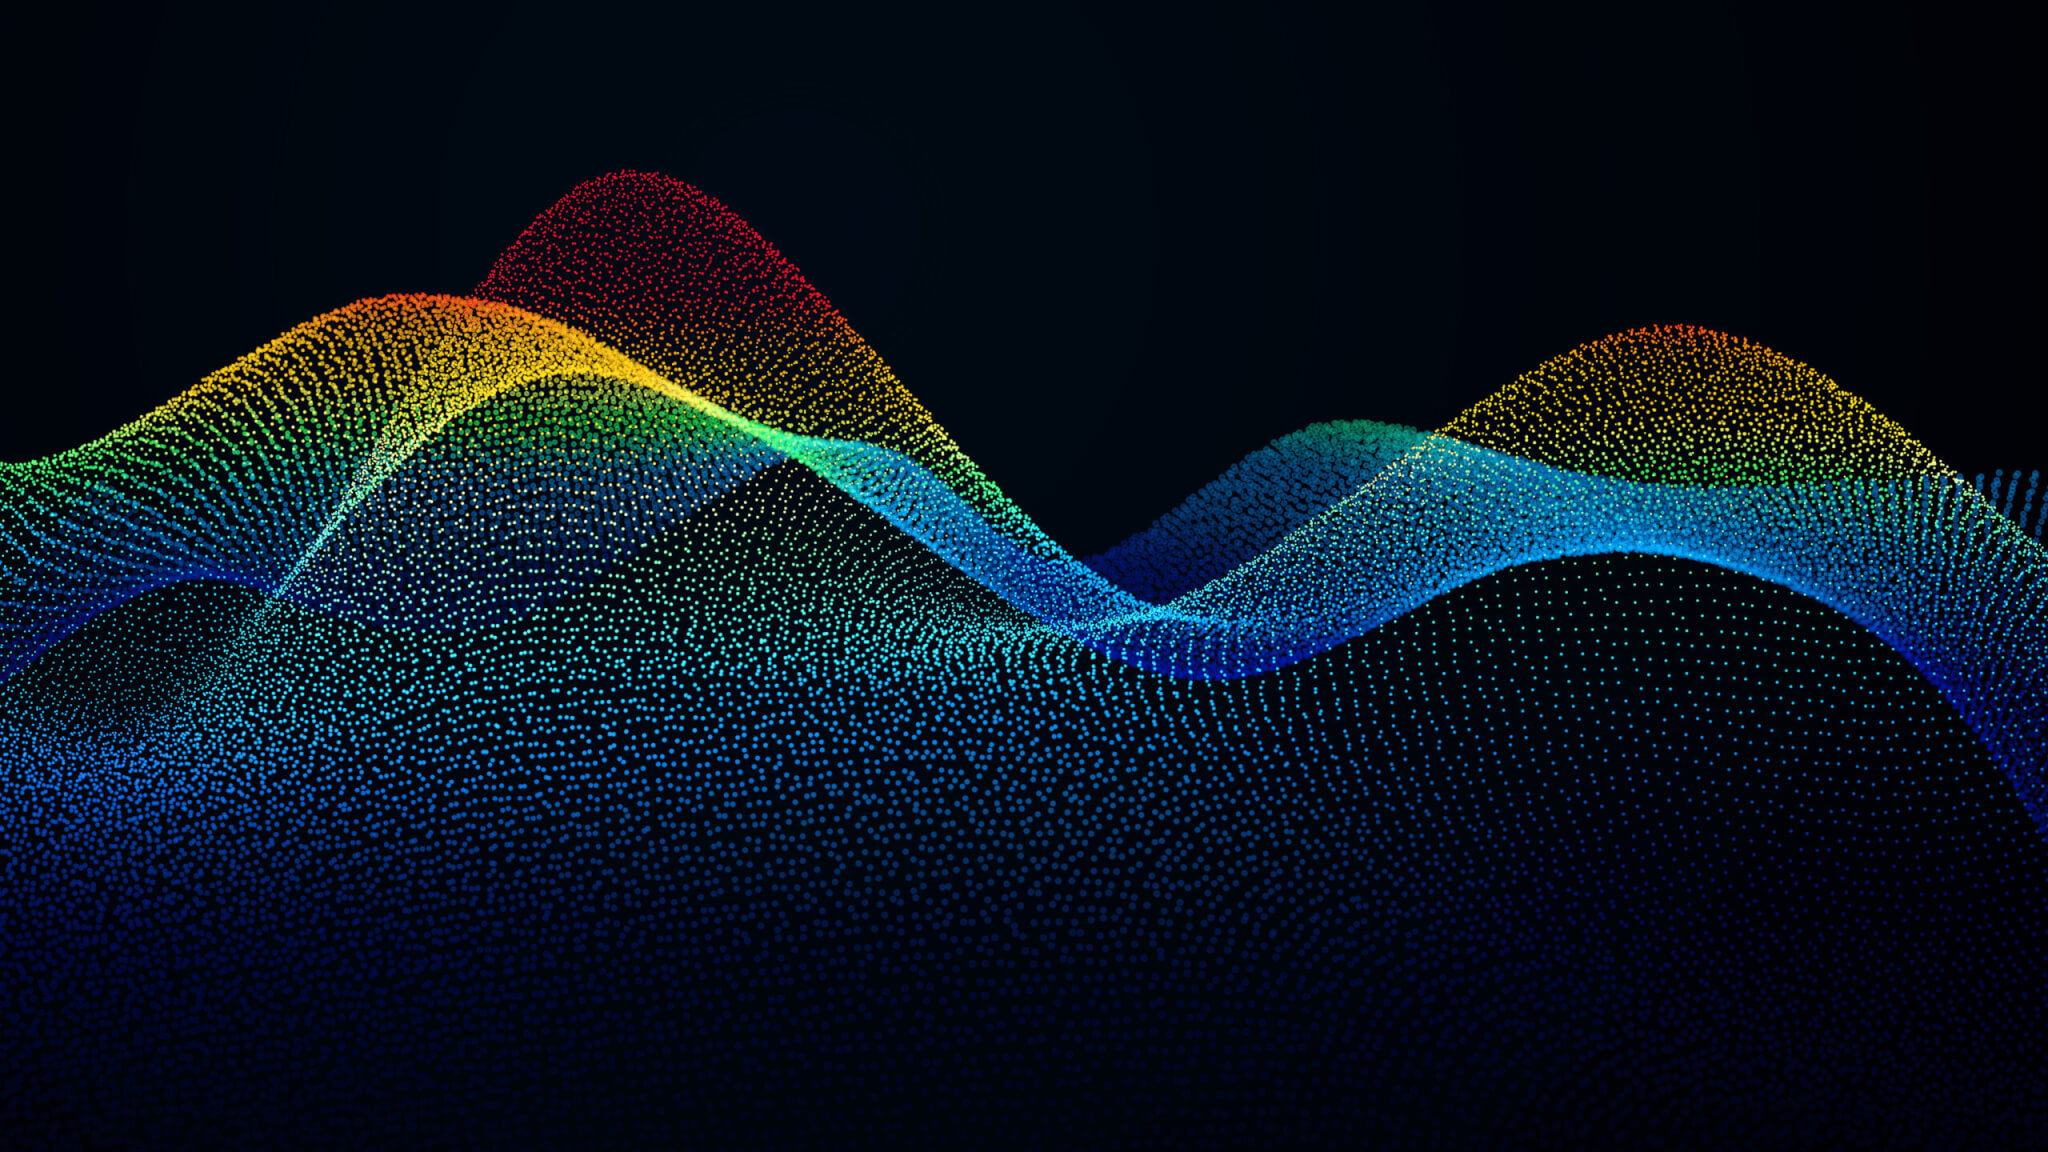 Image depicting ExacTrac Dynamic Surface integration with Varian and Elekta linacs, featuring colorful points and waves on a black background